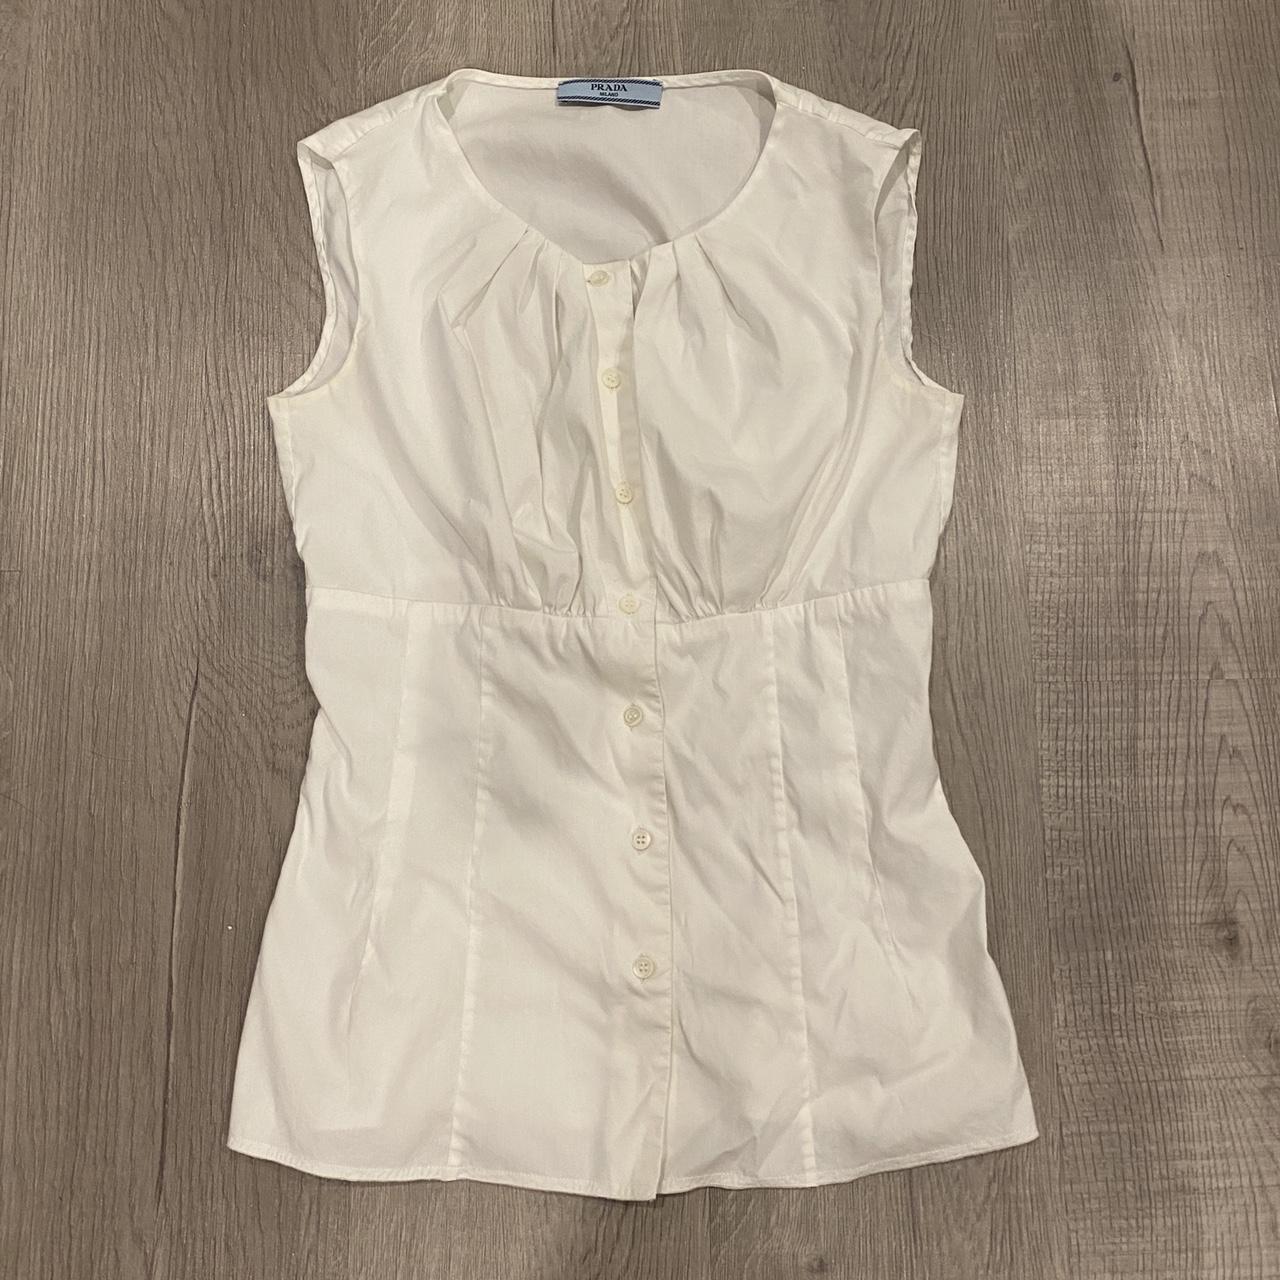 really beautiful fitted white prada top size 38,... - Depop